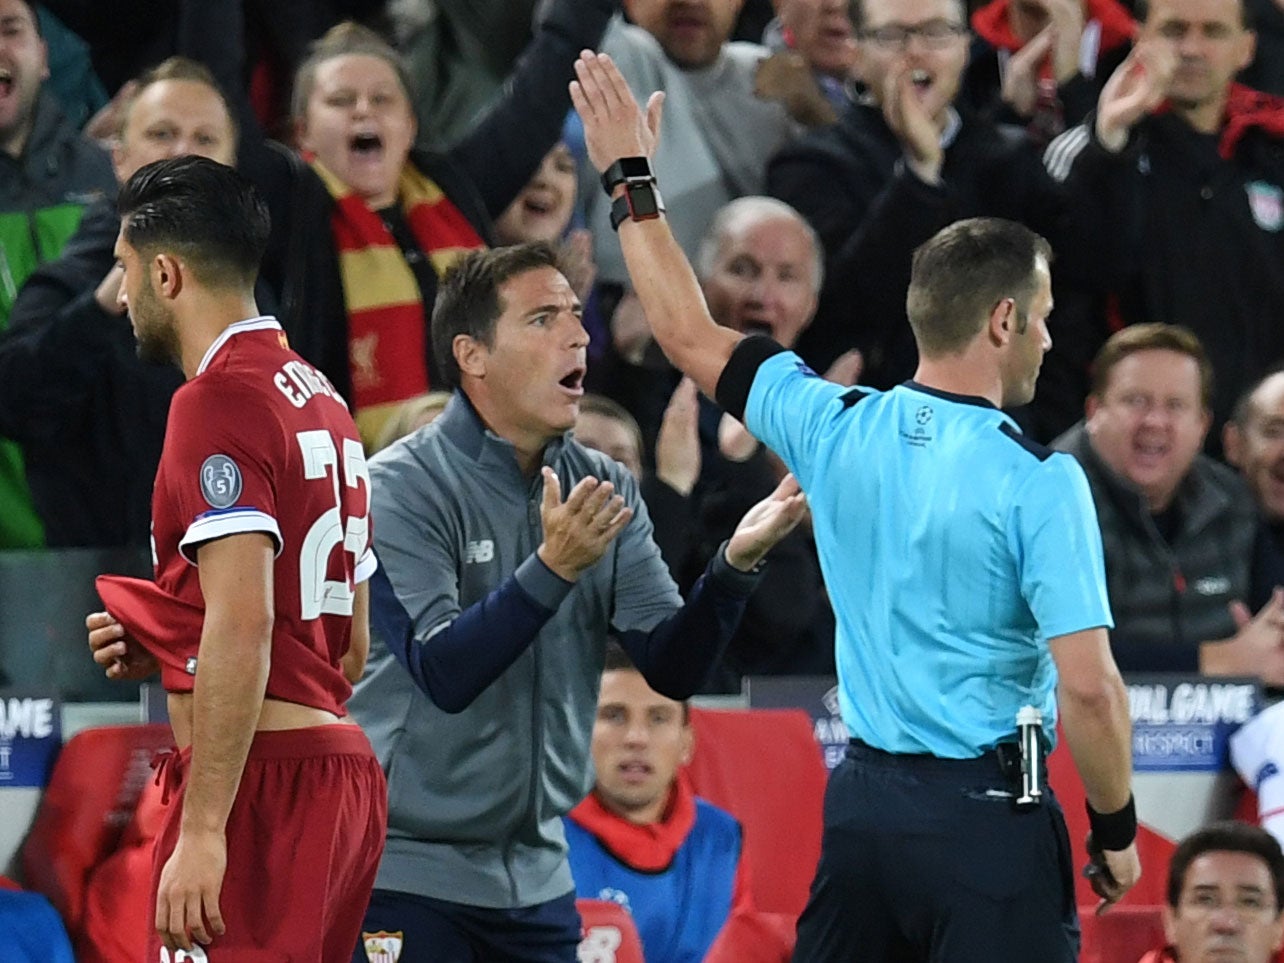 Eduardo Berizzo claims he was attempting to behave in sporting manner